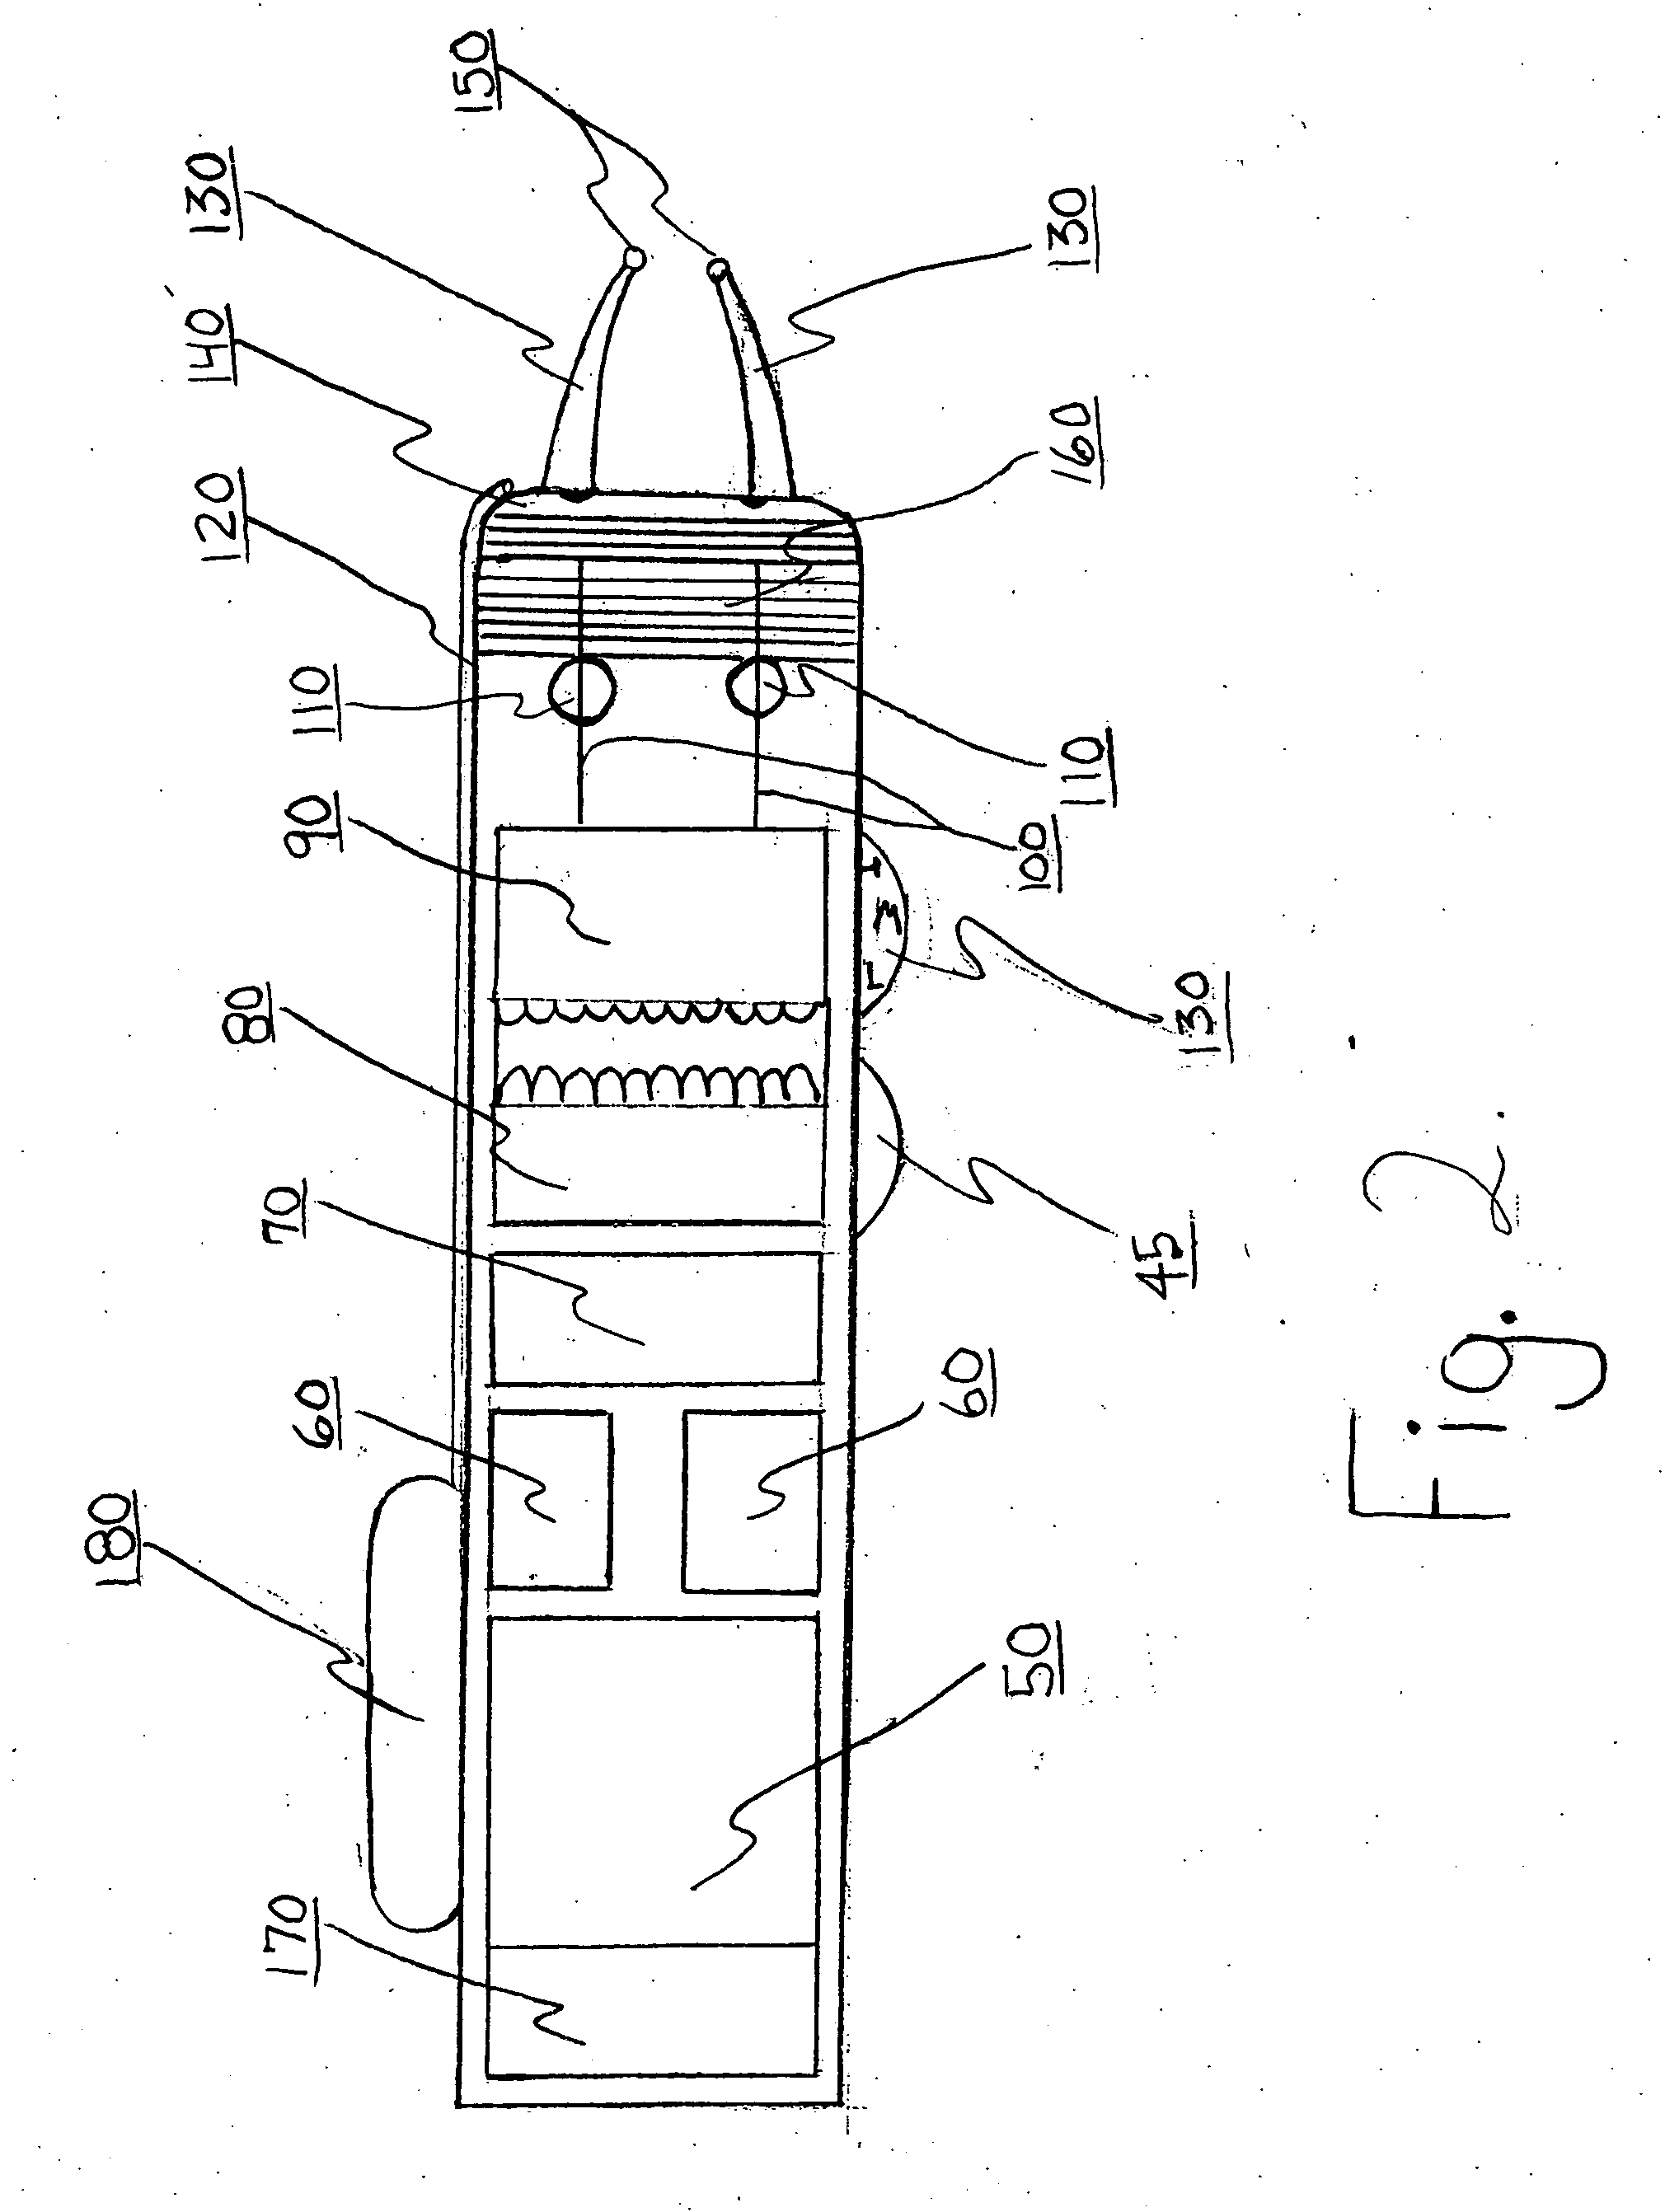 Acne and skin defect treatment via non-radiofrequency electrical current controlled power delivery device and methods